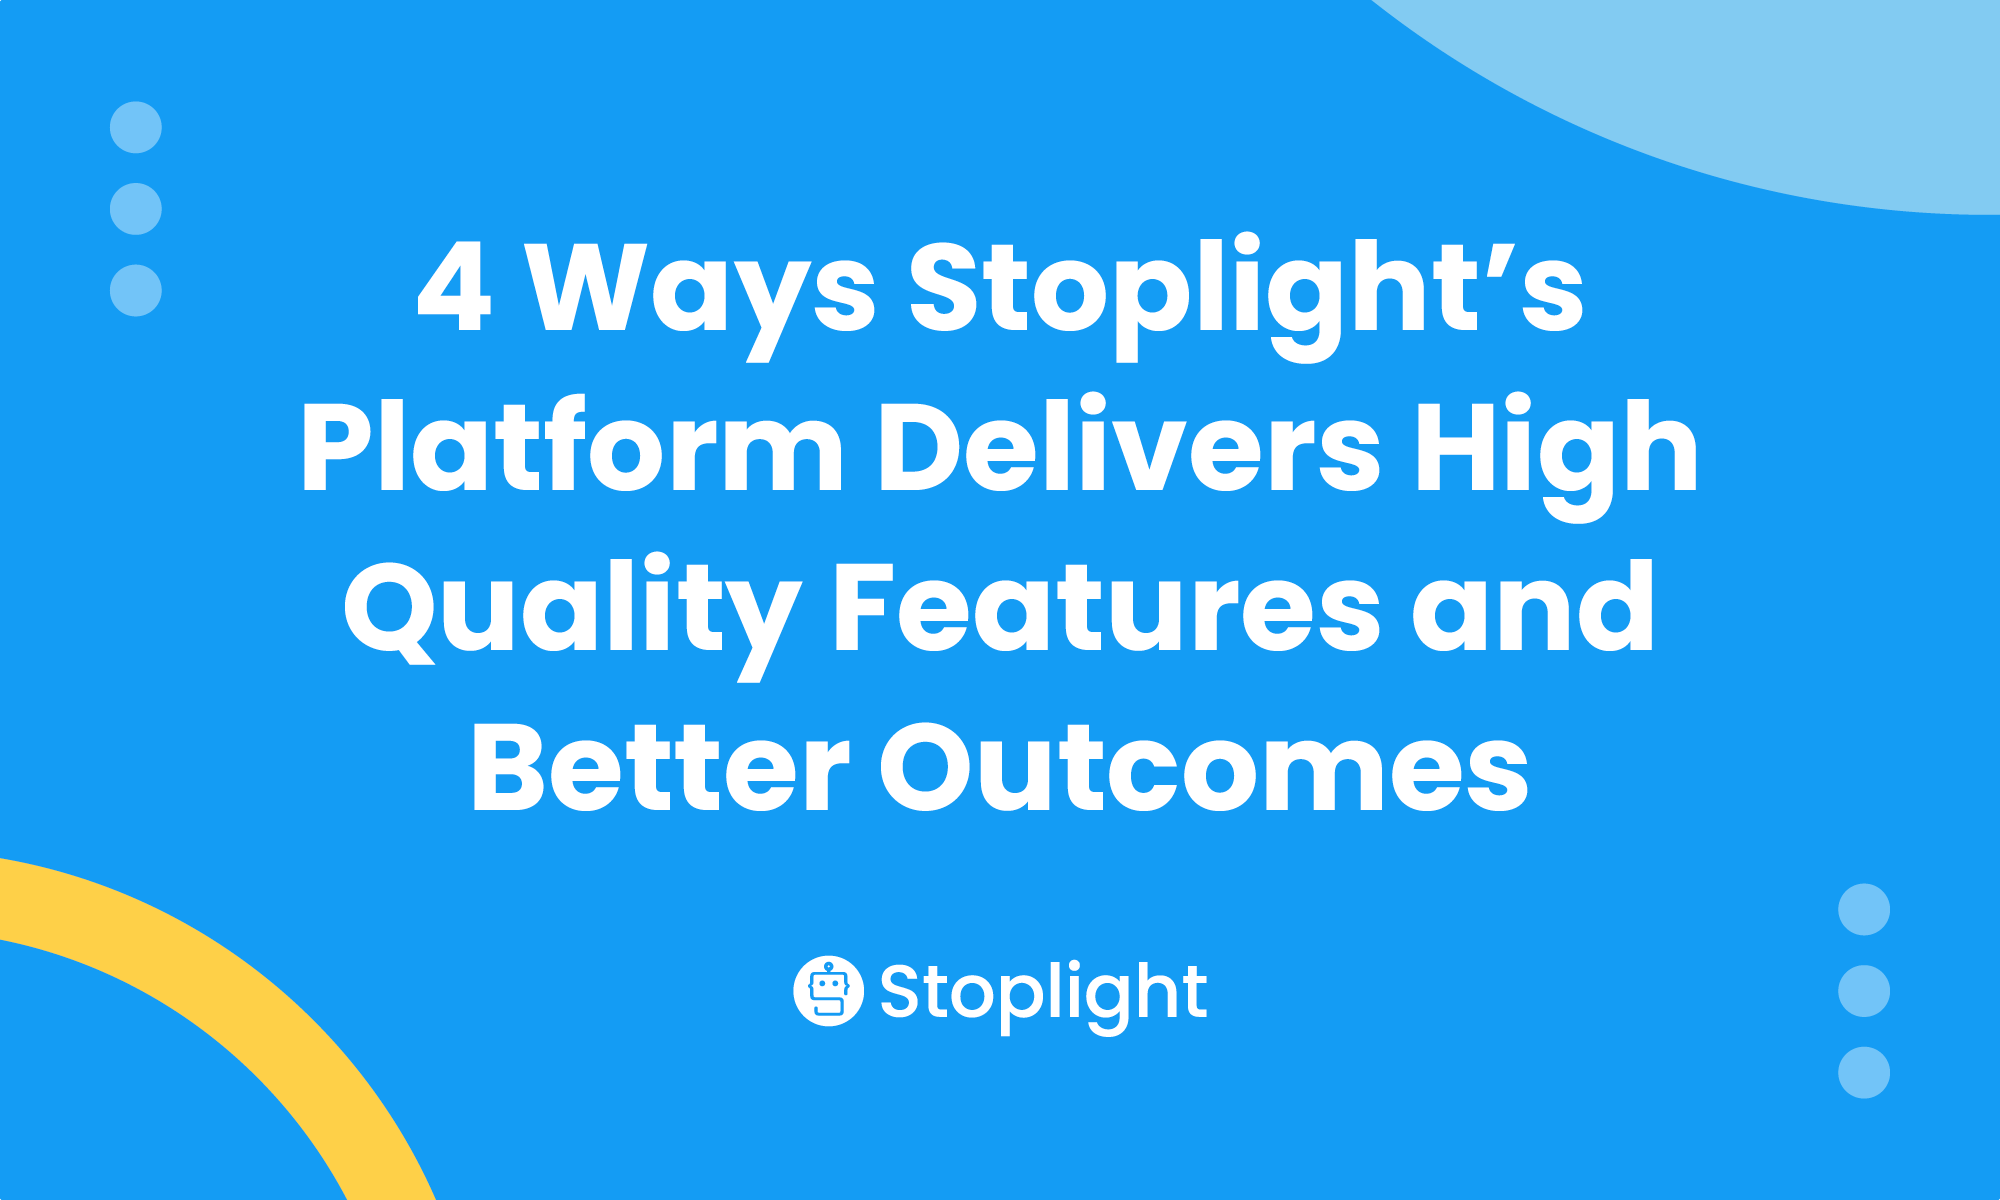 4 Ways Stoplight’s Platform Delivers High-Quality Features & Better Outcomes